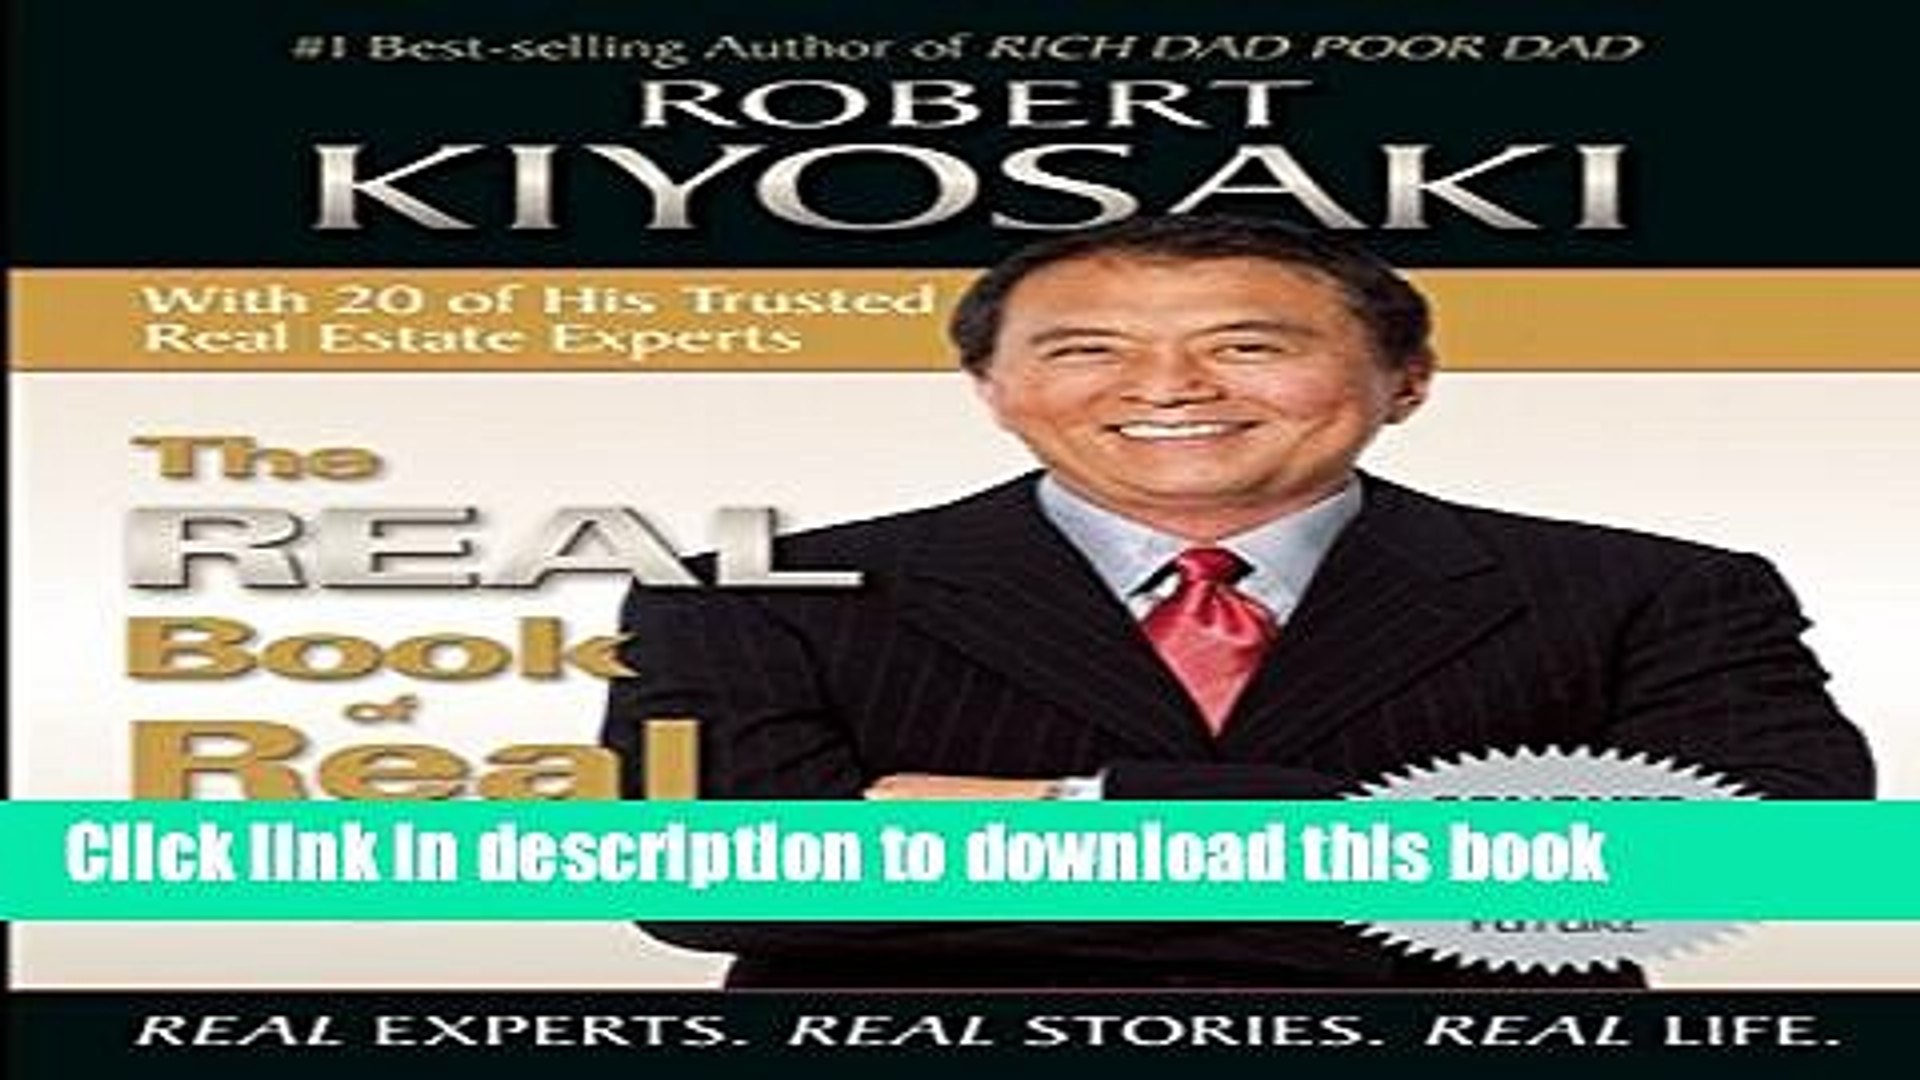 [Popular] The Real Book of Real Estate: Real Experts. Real Stories. Real Life. Hardcover Collection